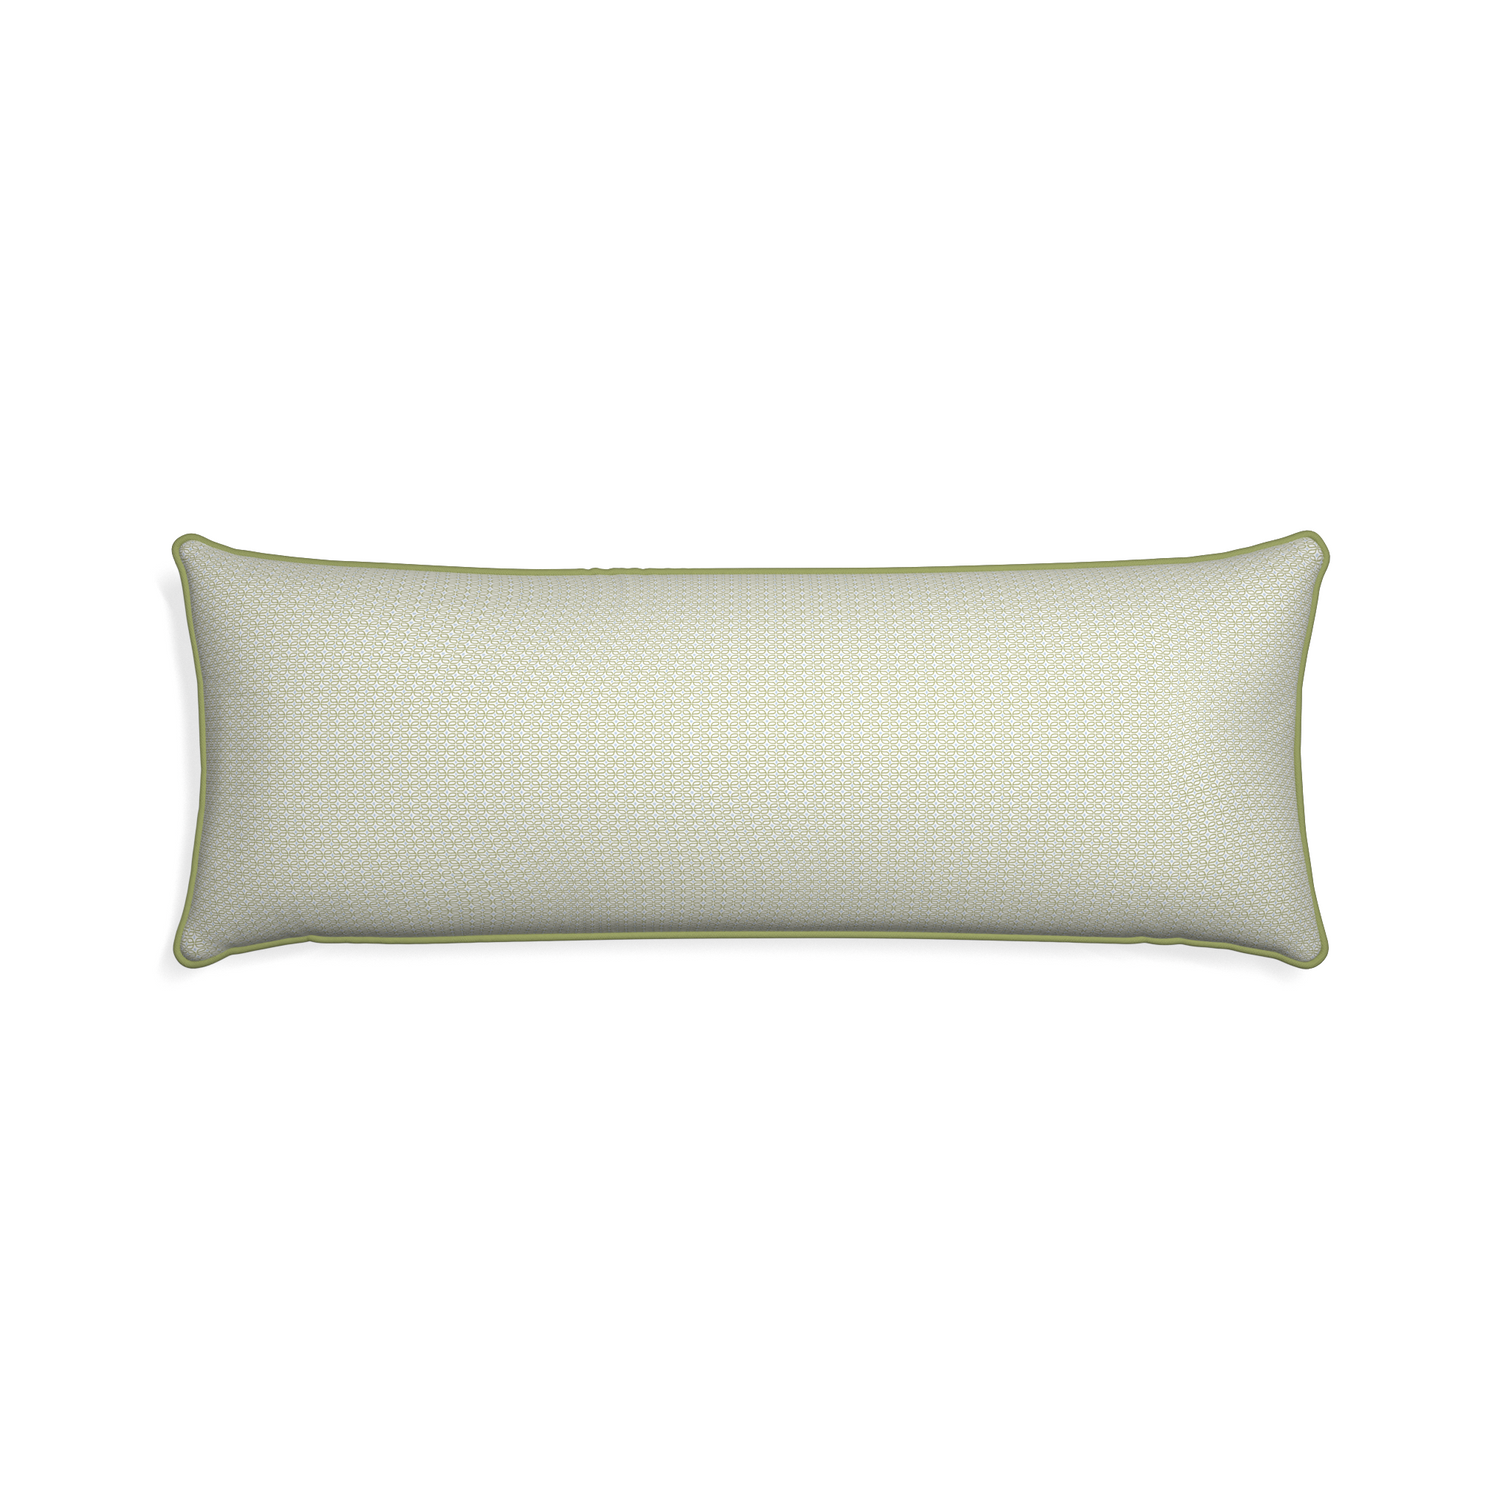 Xl-lumbar loomi moss custom pillow with moss piping on white background